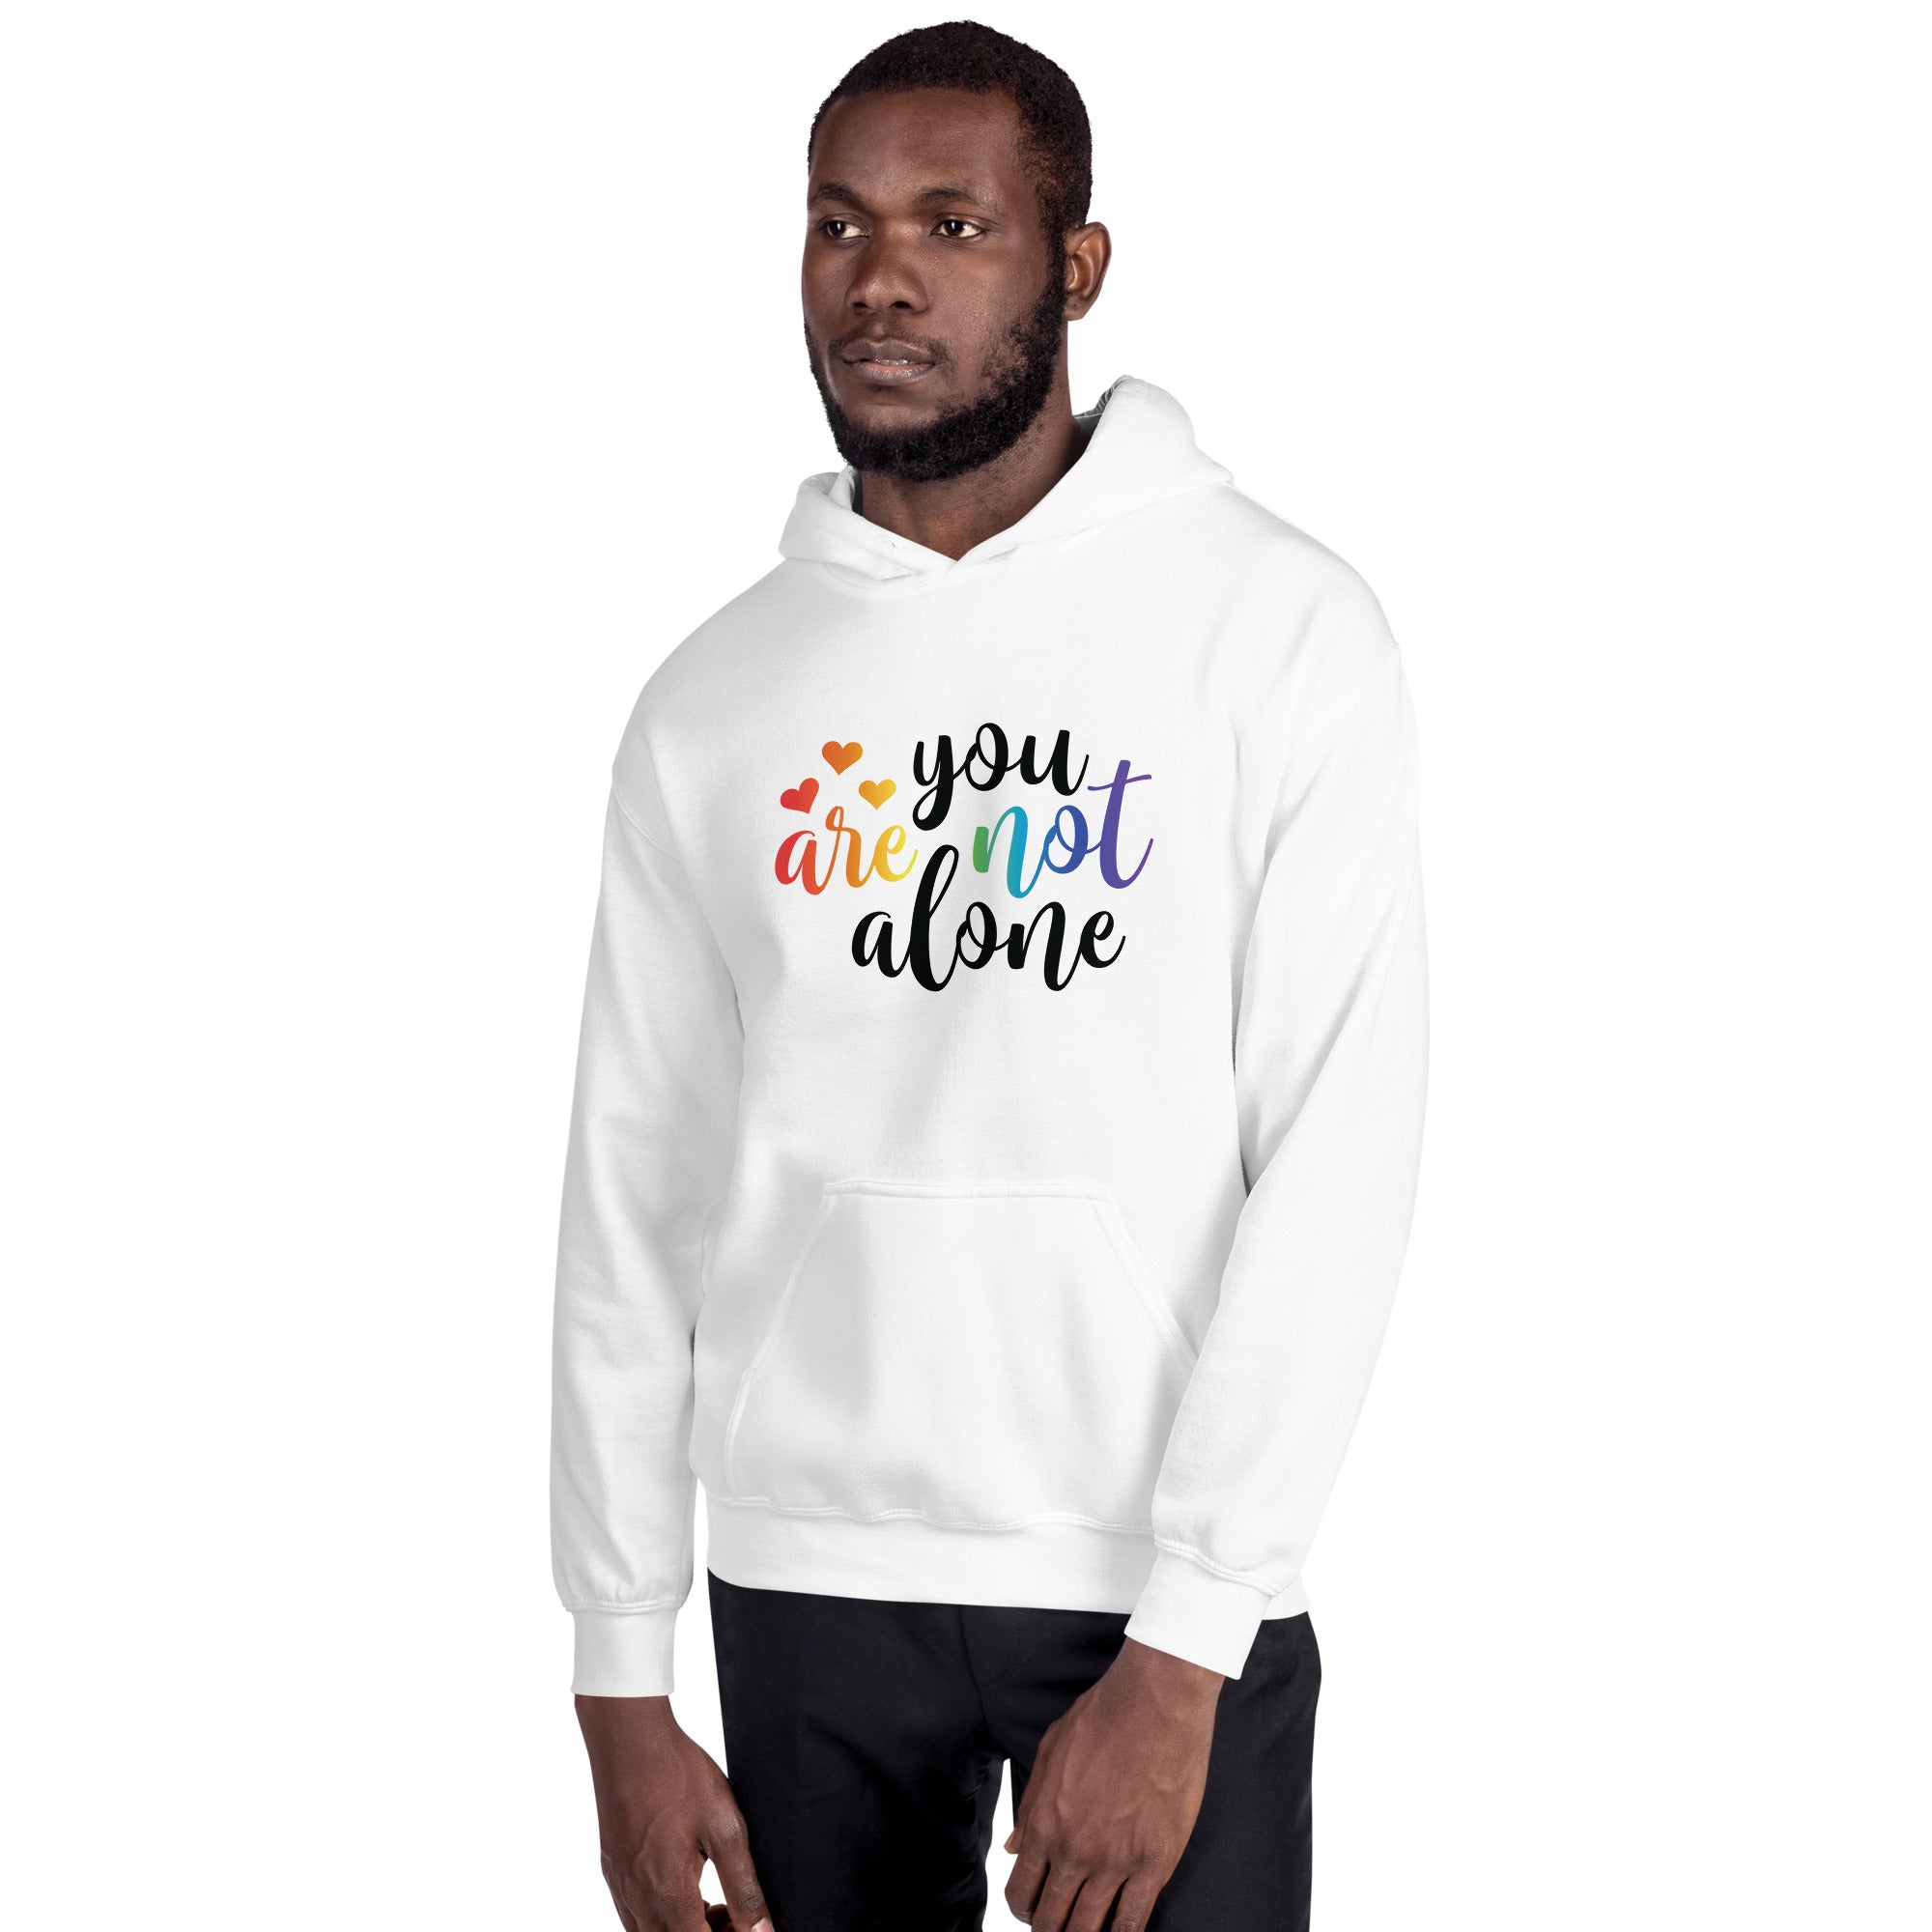 Unisex Hoodie- ADHD- You Are Not Alone